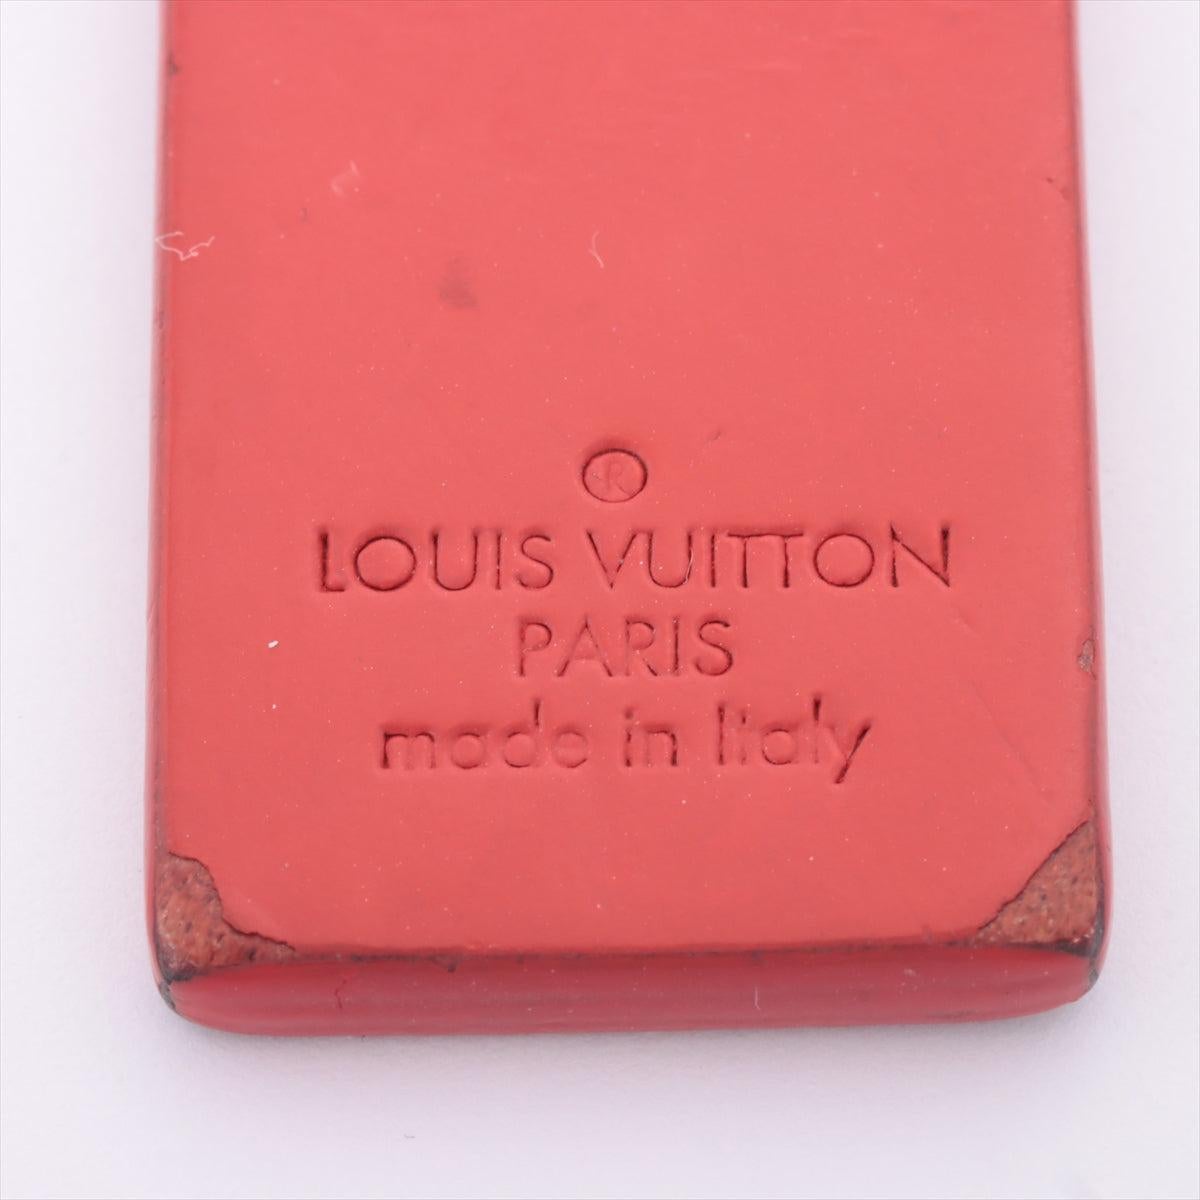 Red The Louis Vuitton X Supreme Keychain features Louis Vuitton’s red signature 